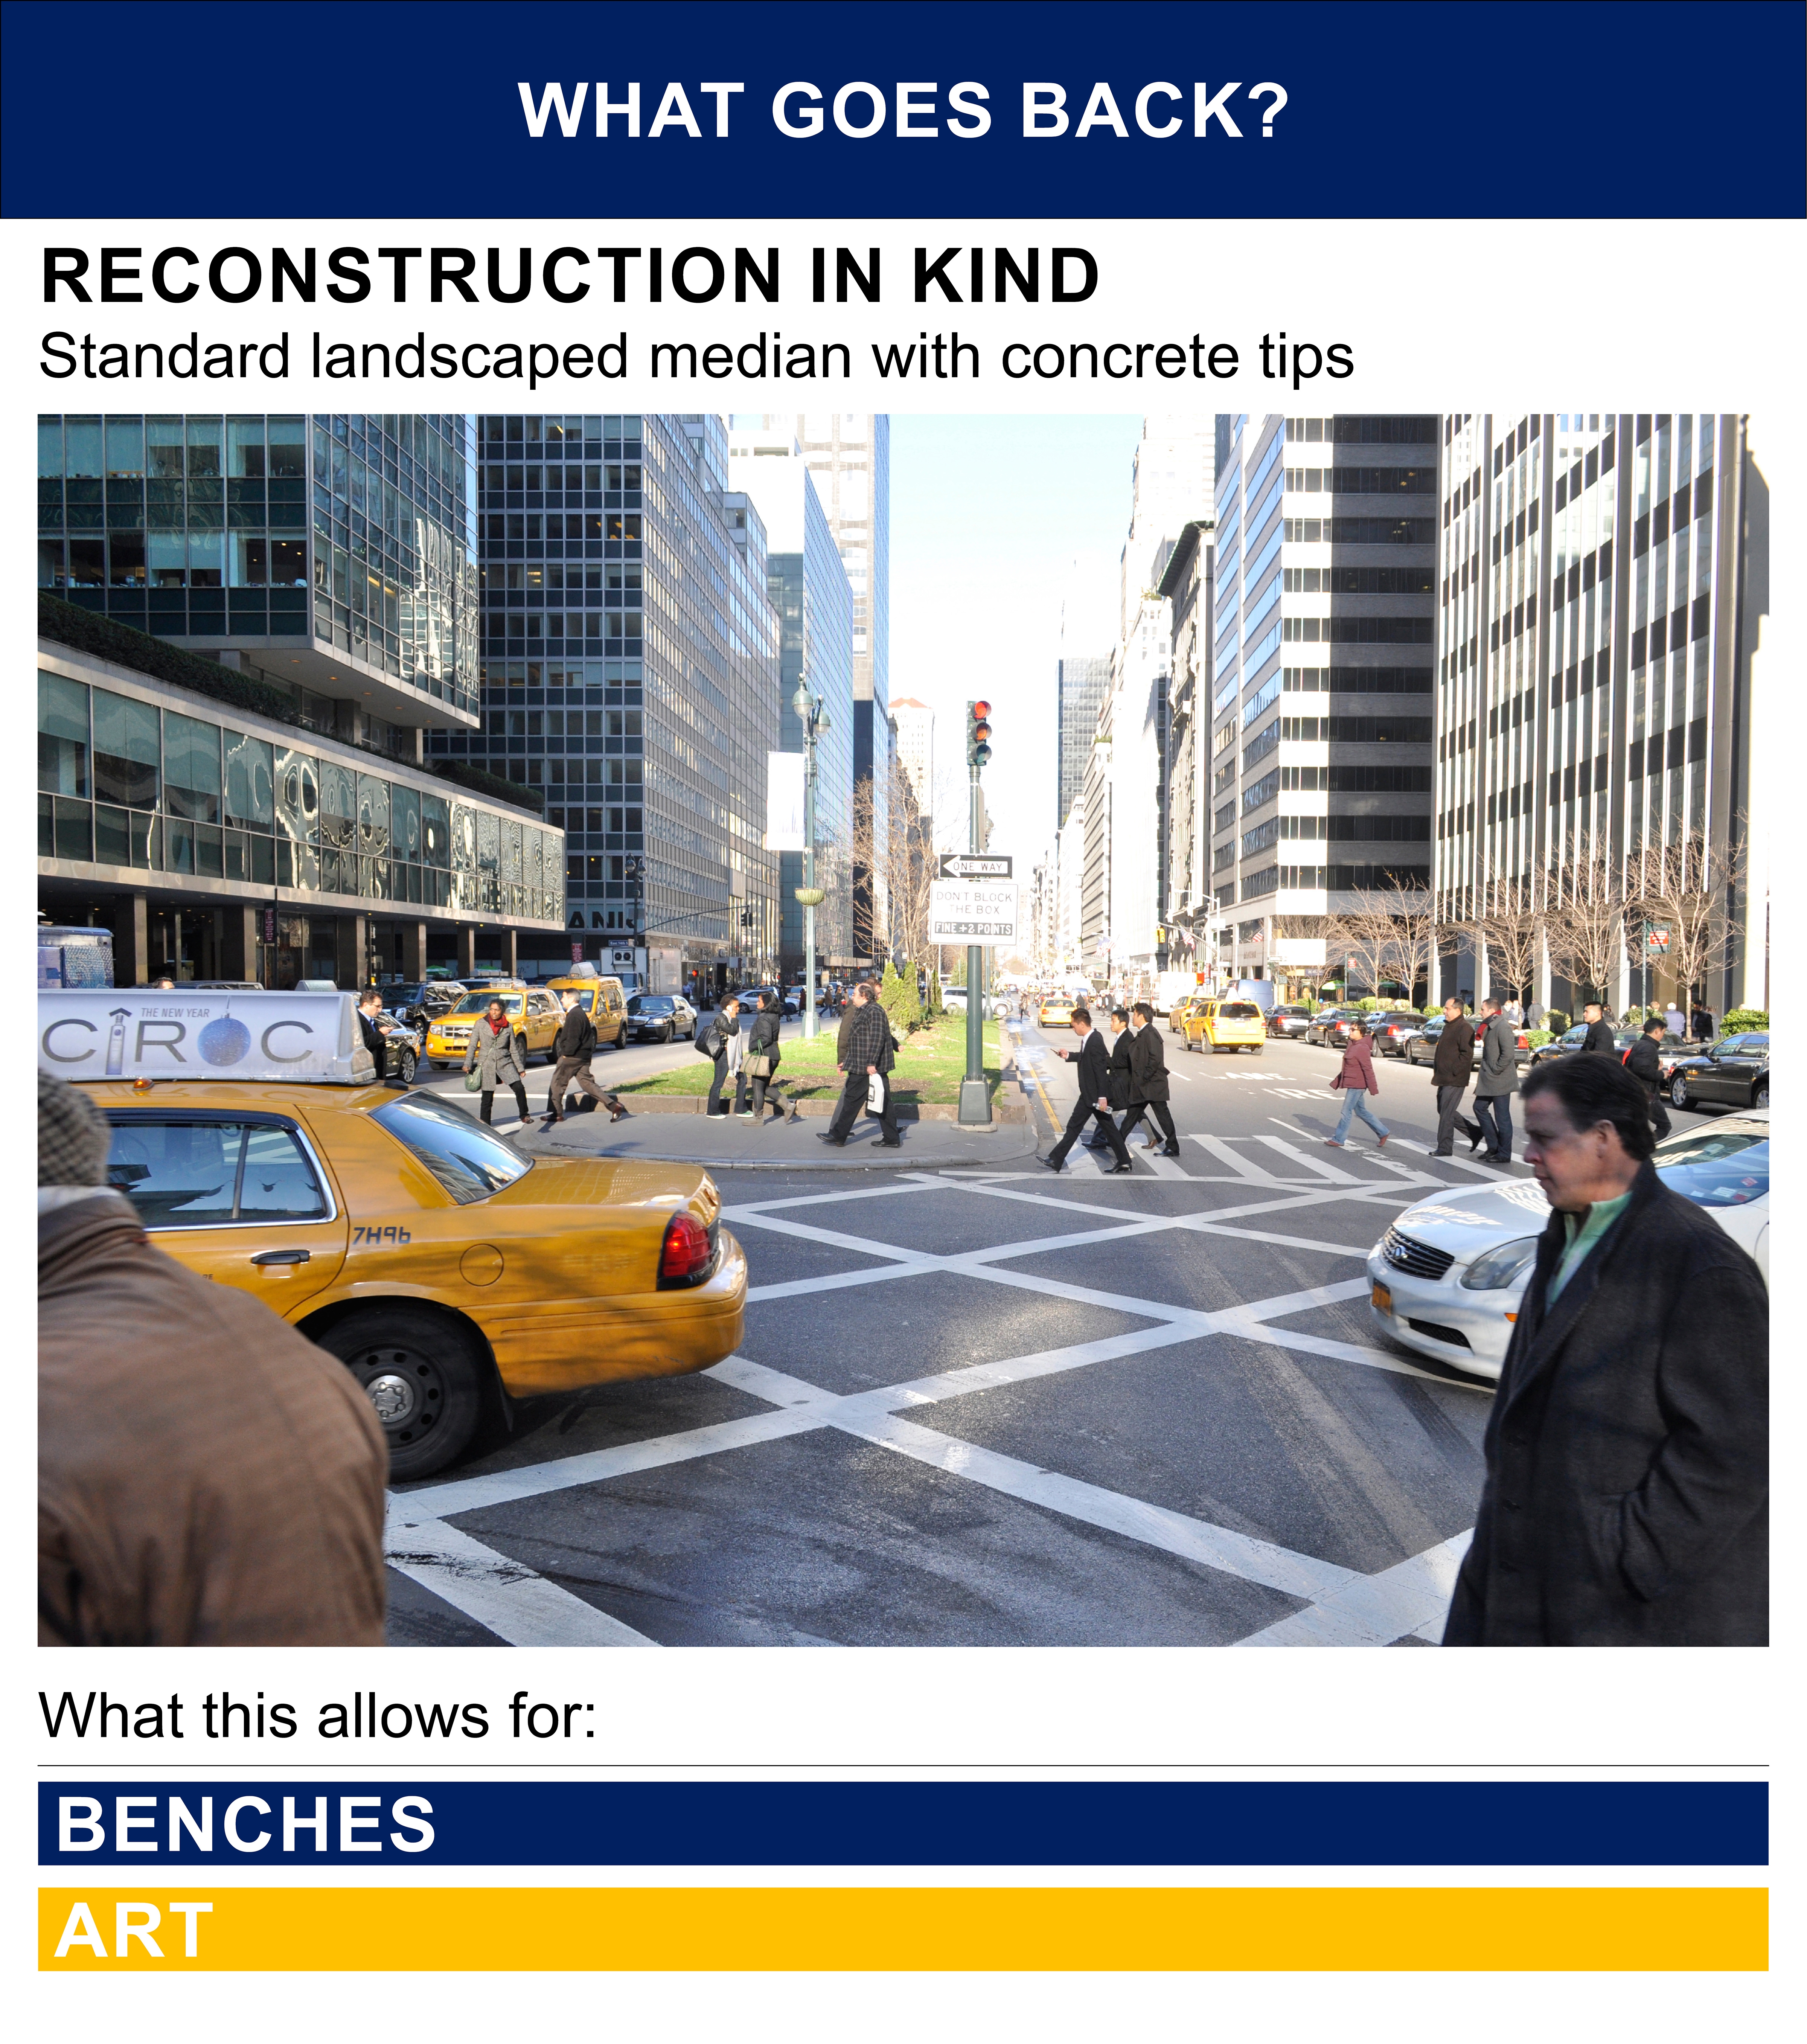 Option 1, reconstruction in-kind. Median reconstructed as they are today. No increase in public space.